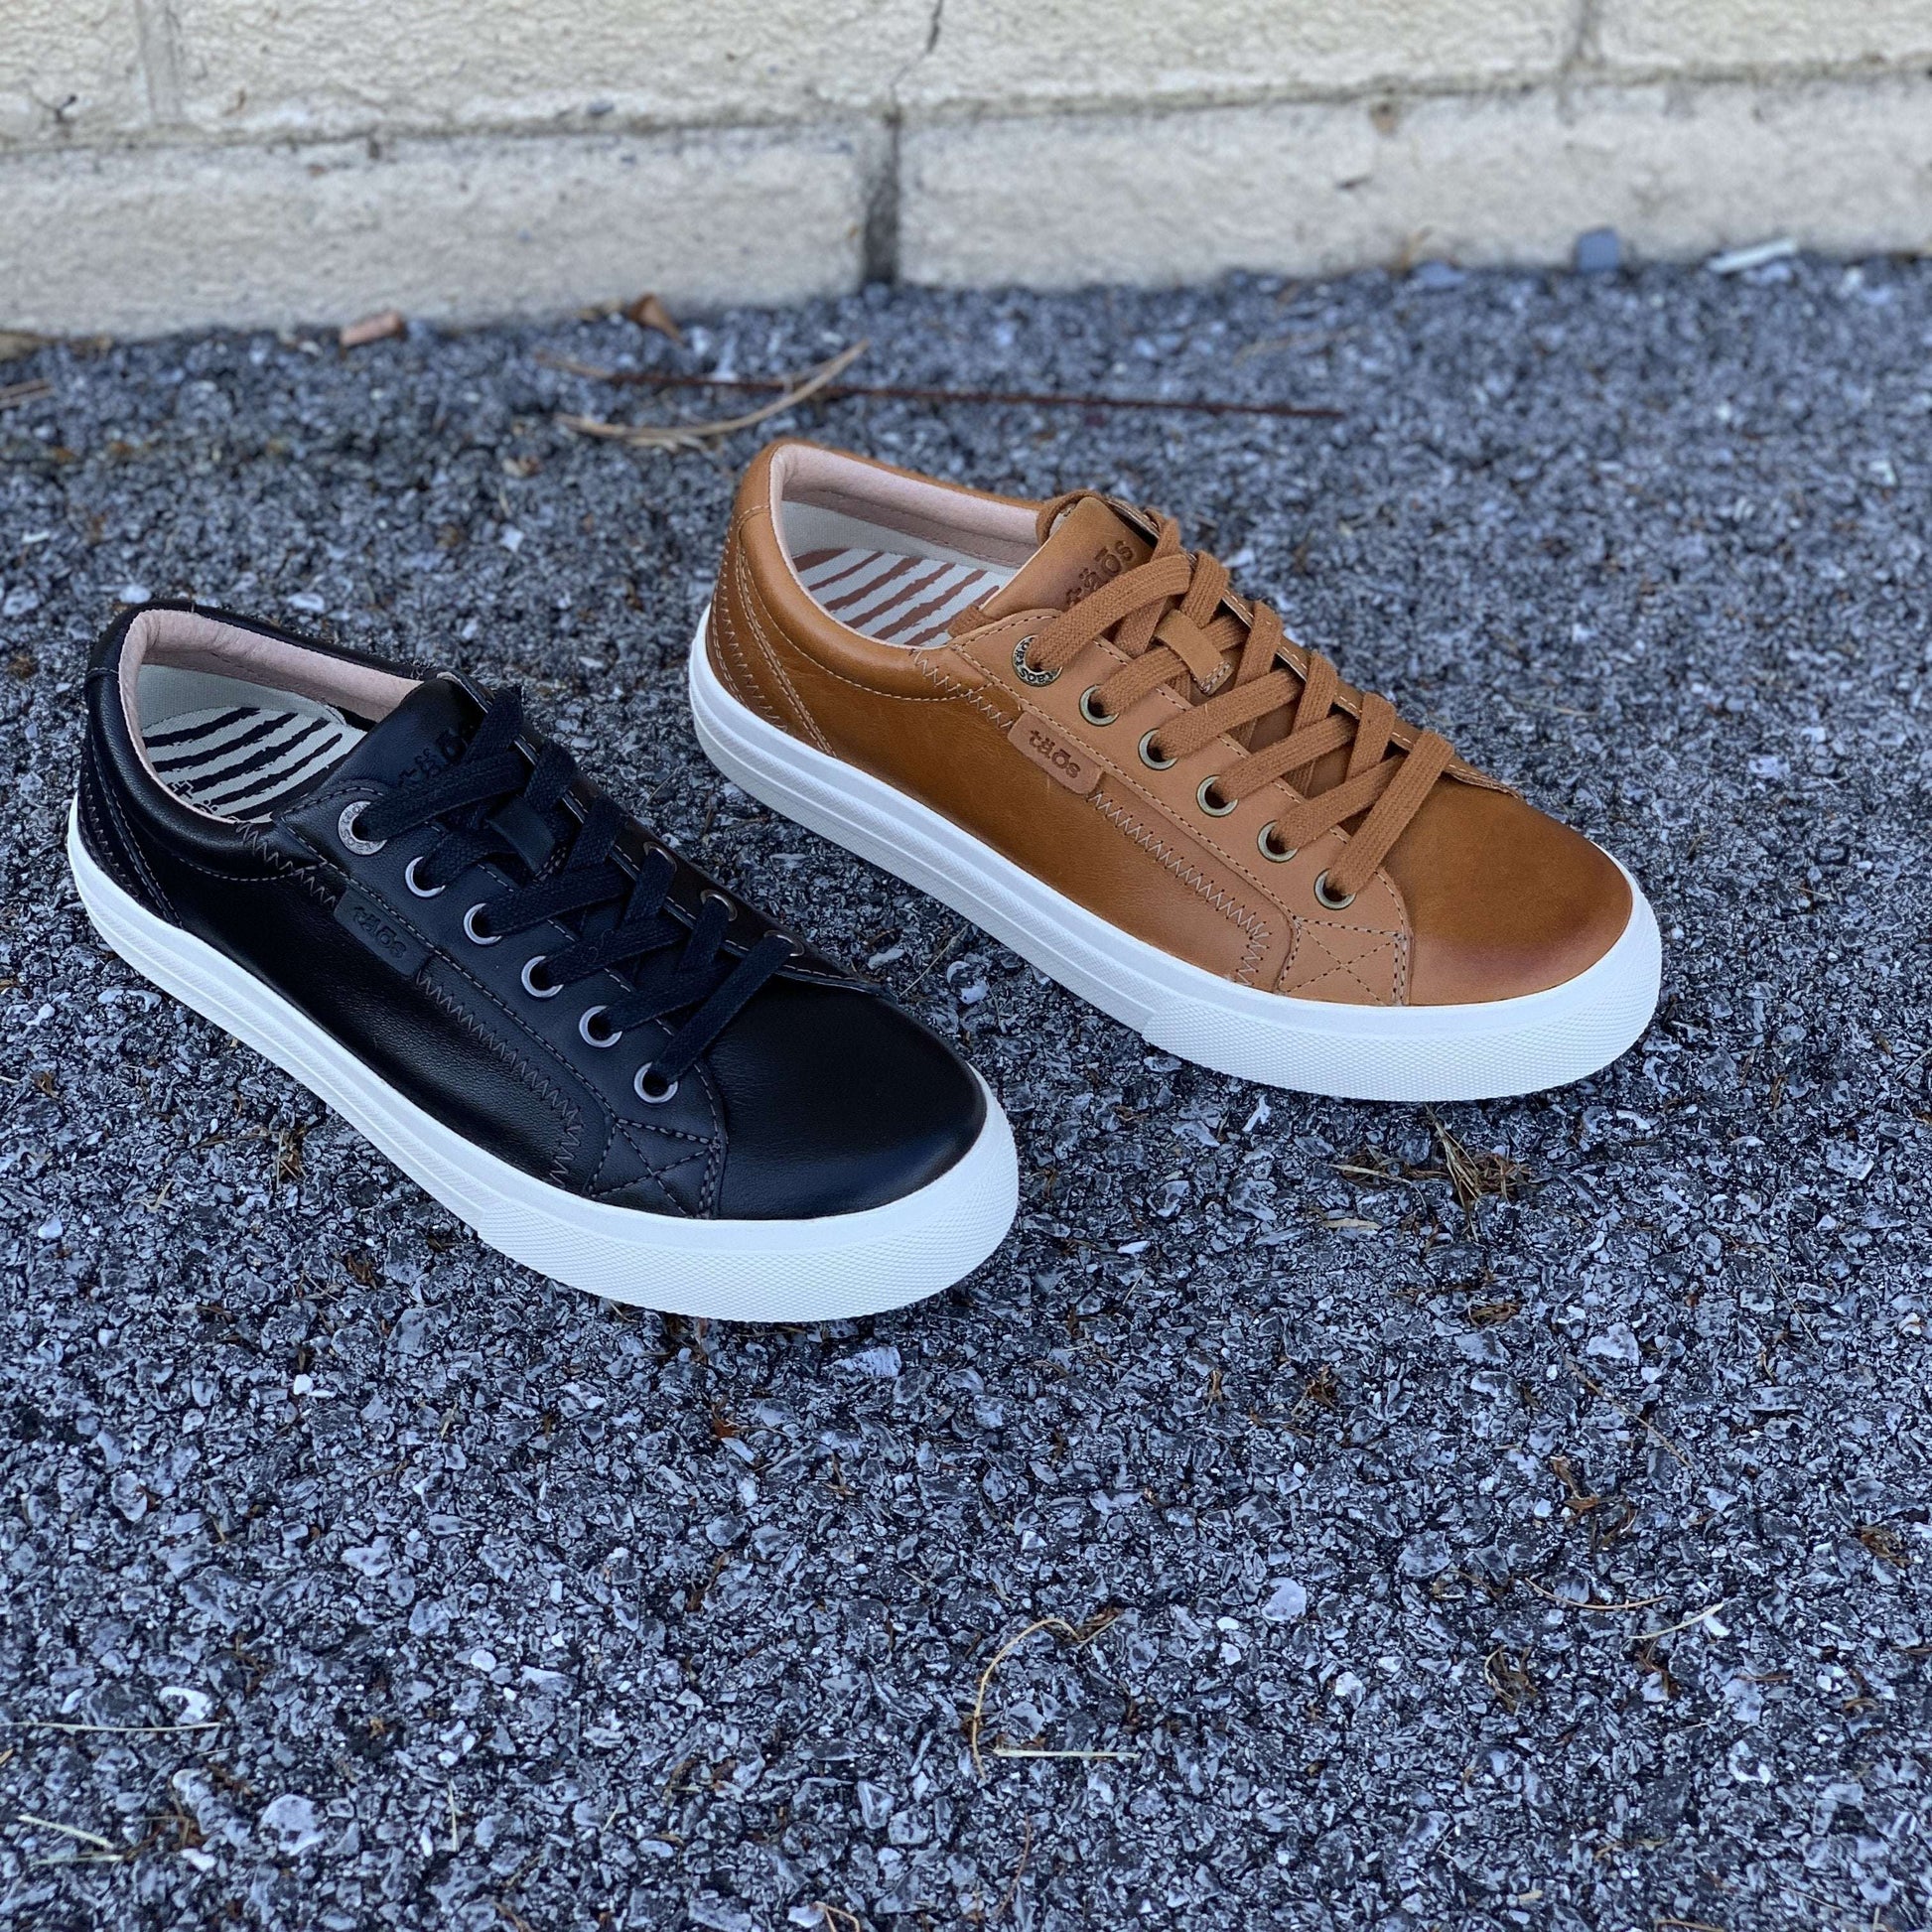 Men's Free Soul – Low Cut Hand-Made Leather Italian Sneakers